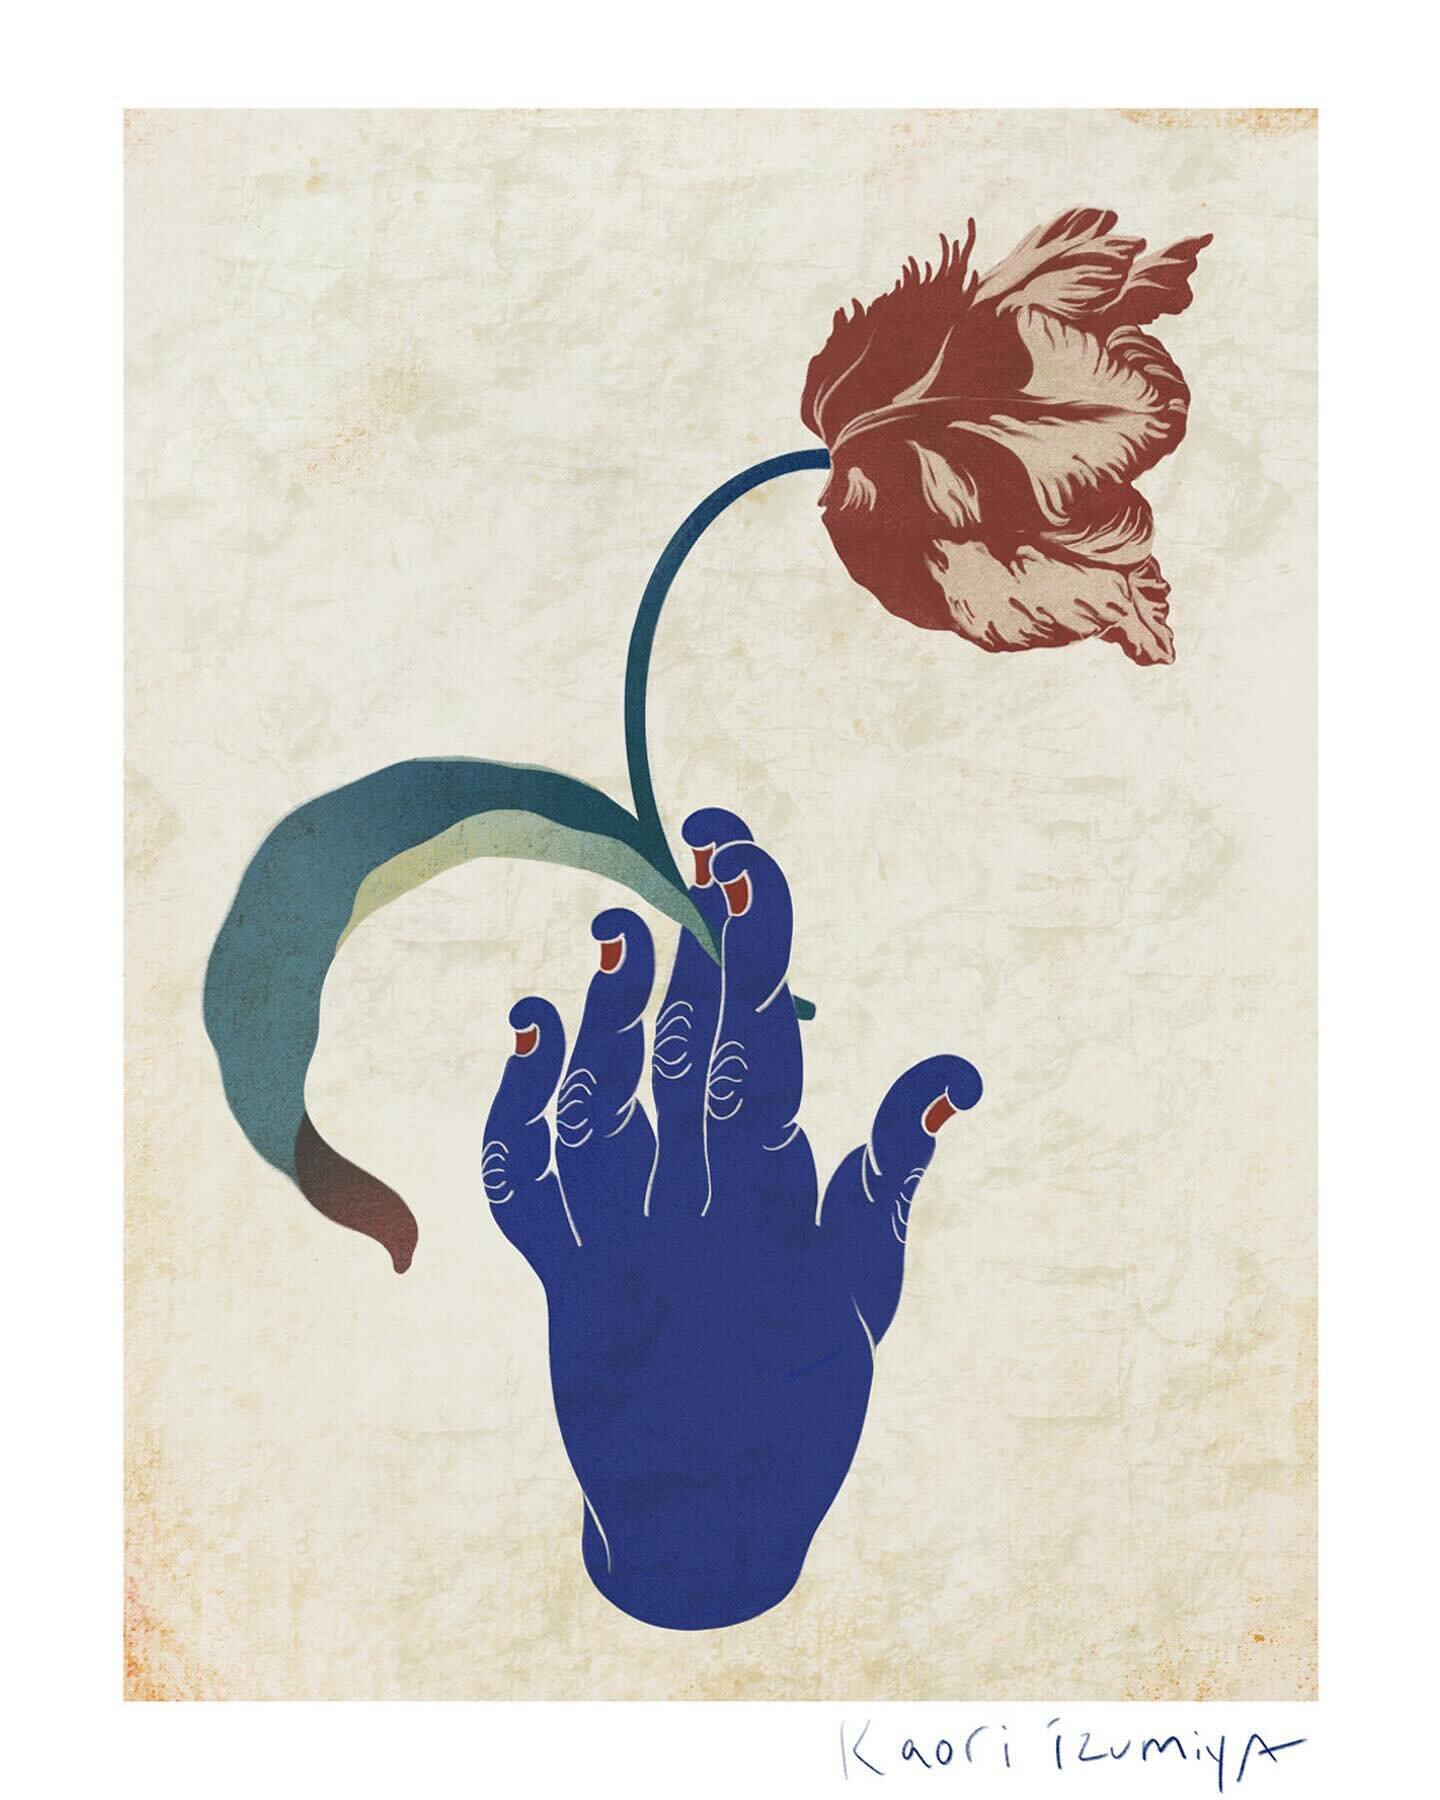 Blue hand series is back with spring 🌷
.
.
.
.
#art #illustration #blue #hand #tulip #minimalism #spring